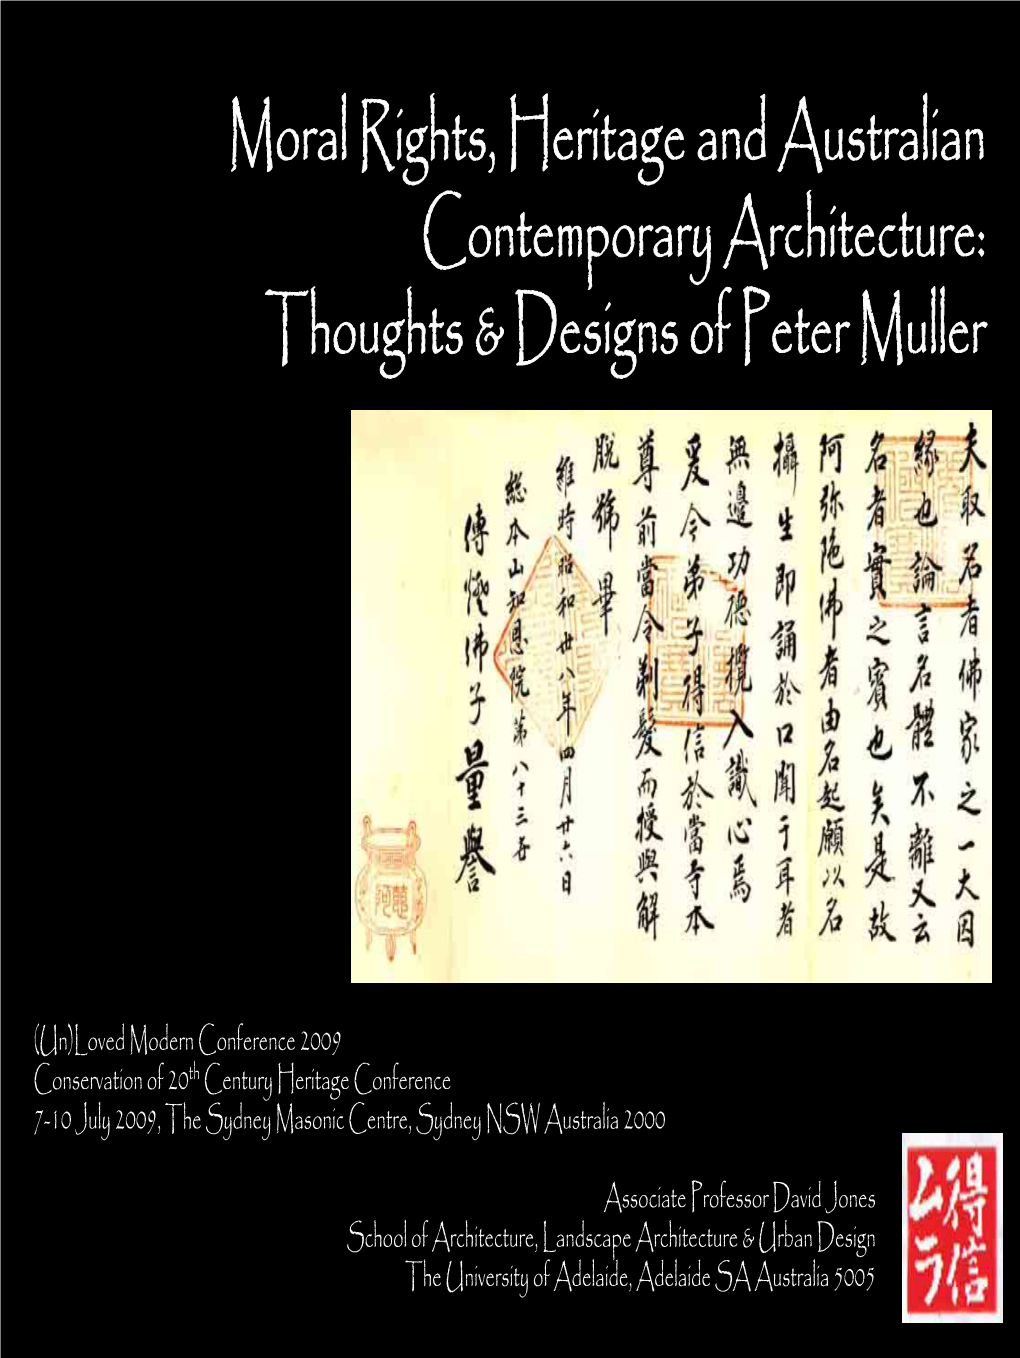 Moral Rights, Heritage and Australian Contemporary Architecture: Thoughts & Designs of Peter Muller